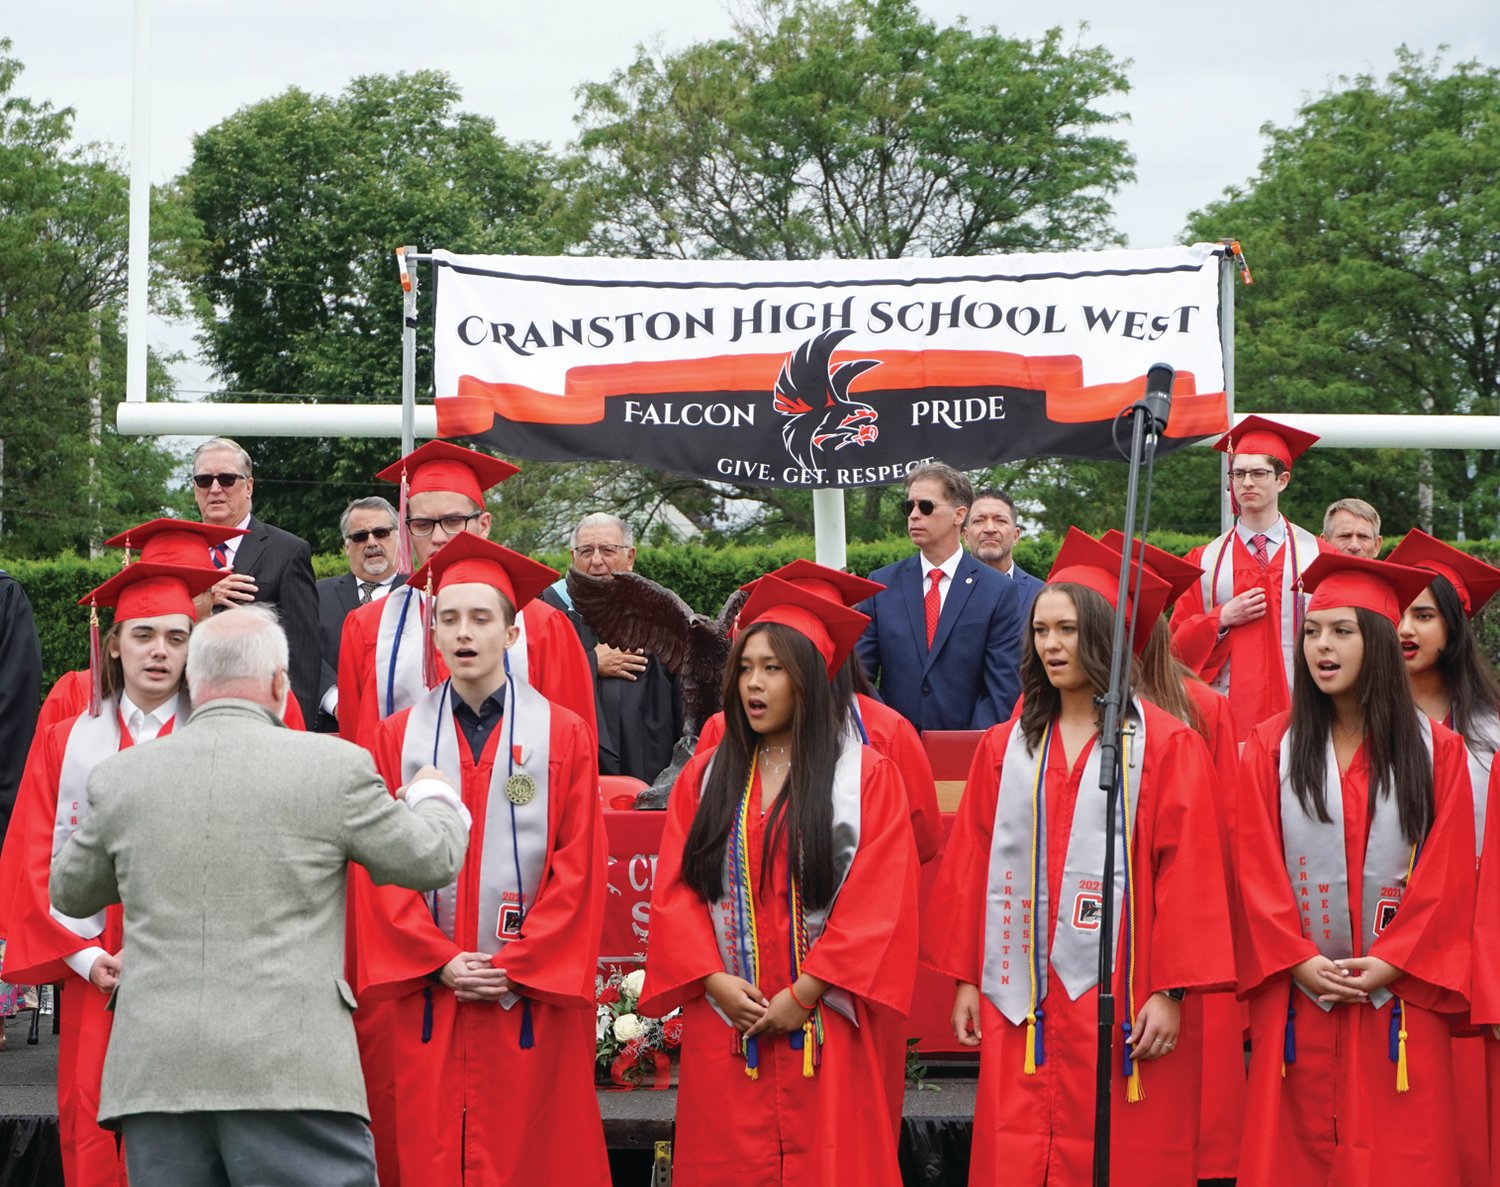 TOGETHER IN SONG: Cranston West Senior Choir members lead the crowd in singing the national anthem prior to
Saturday’s ceremony